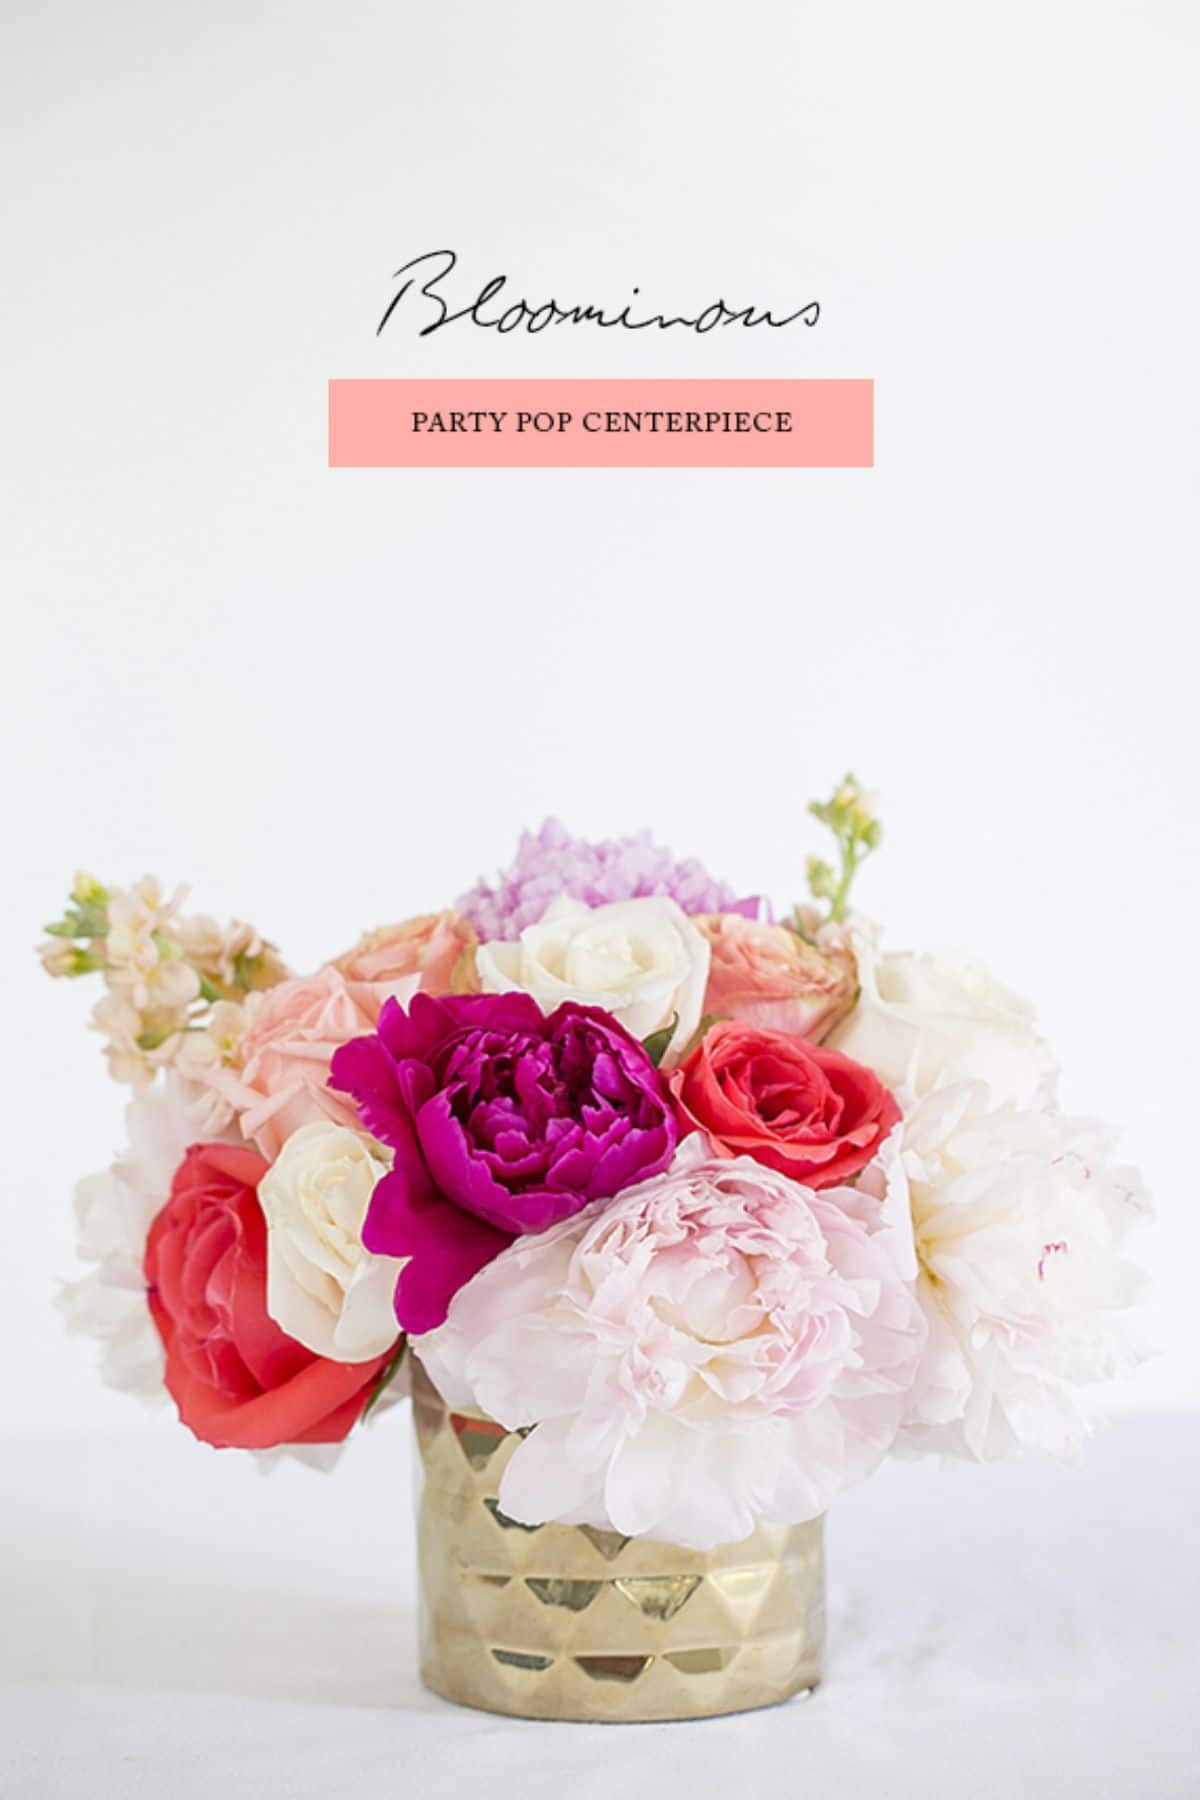 On a white background is a rose gold metal pot filled with white, red and purple flowers